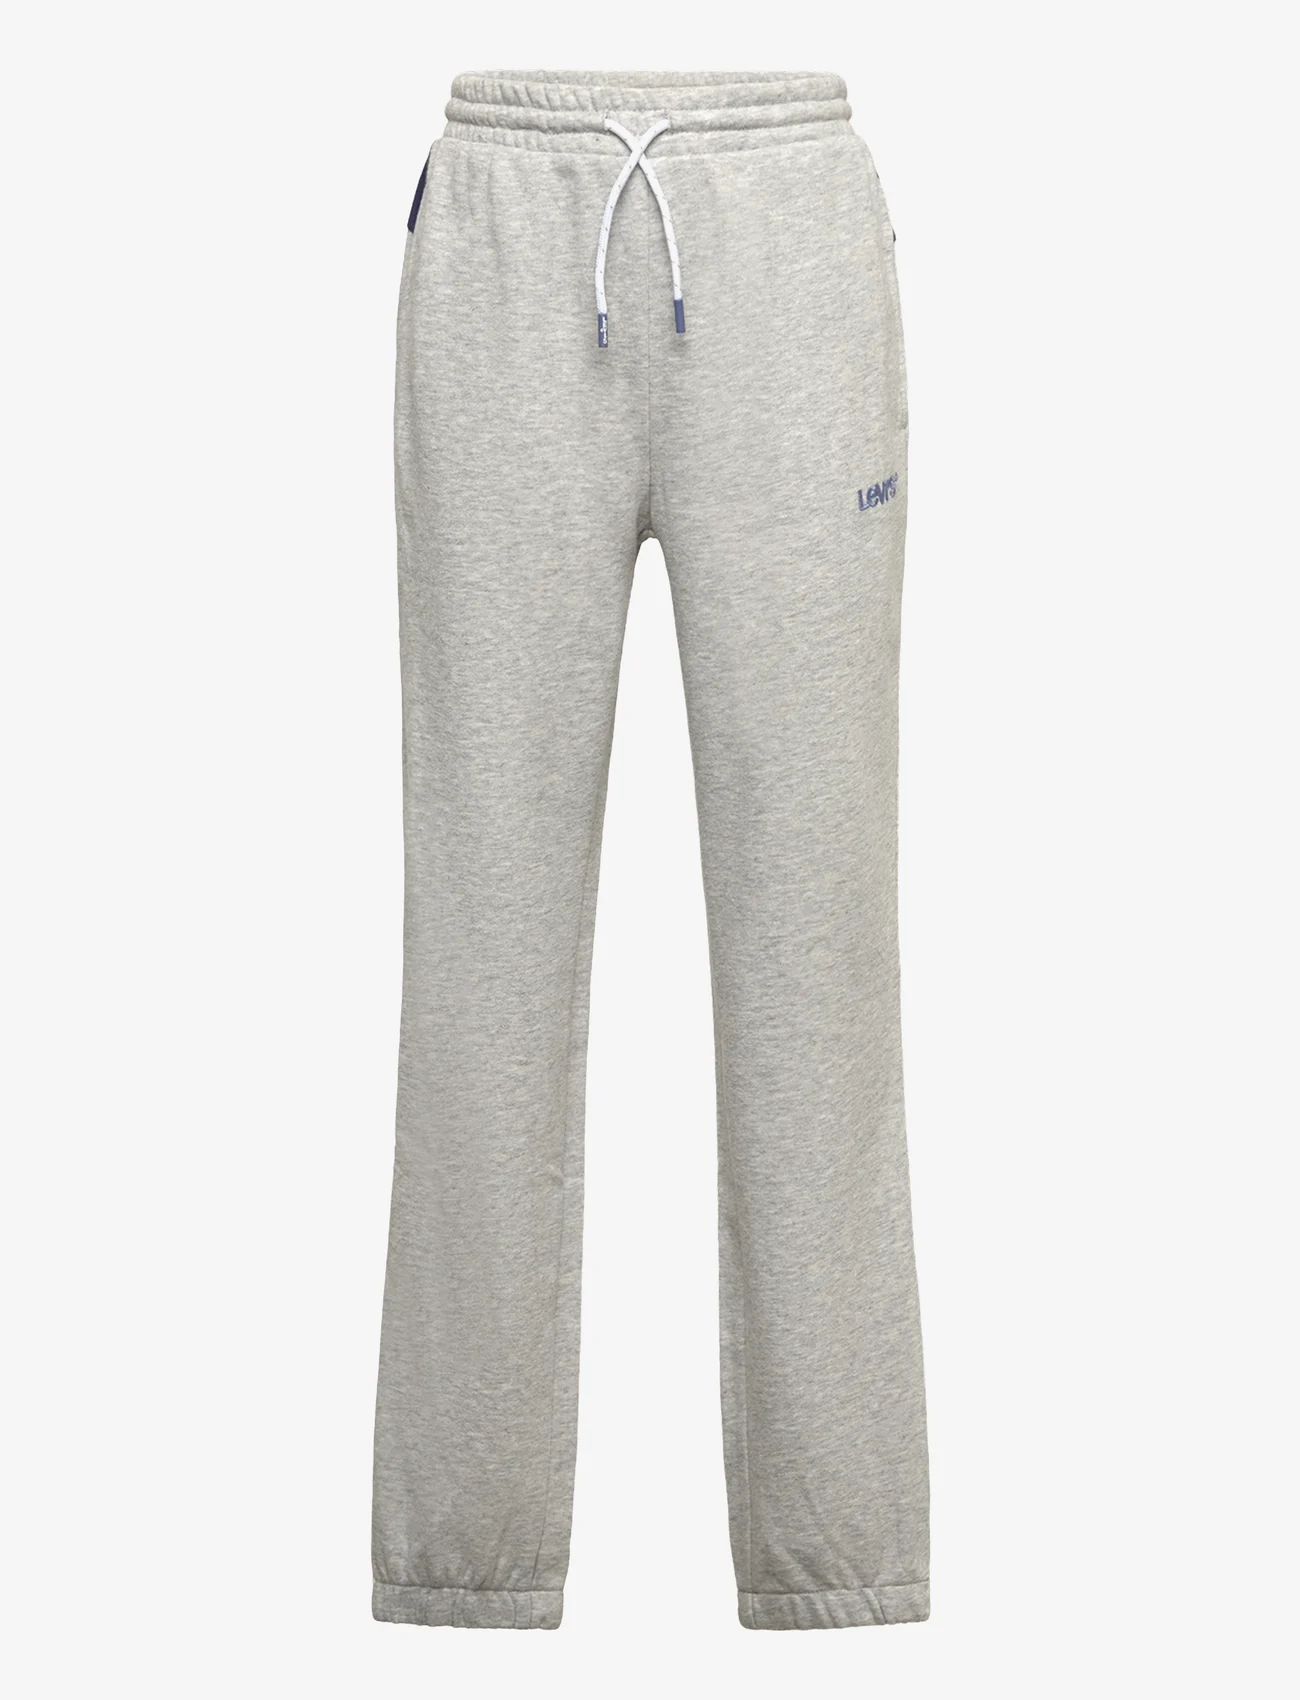 Levi's - Levi's Colorblocked Relaxed Joggers - madalaimad hinnad - grey - 0